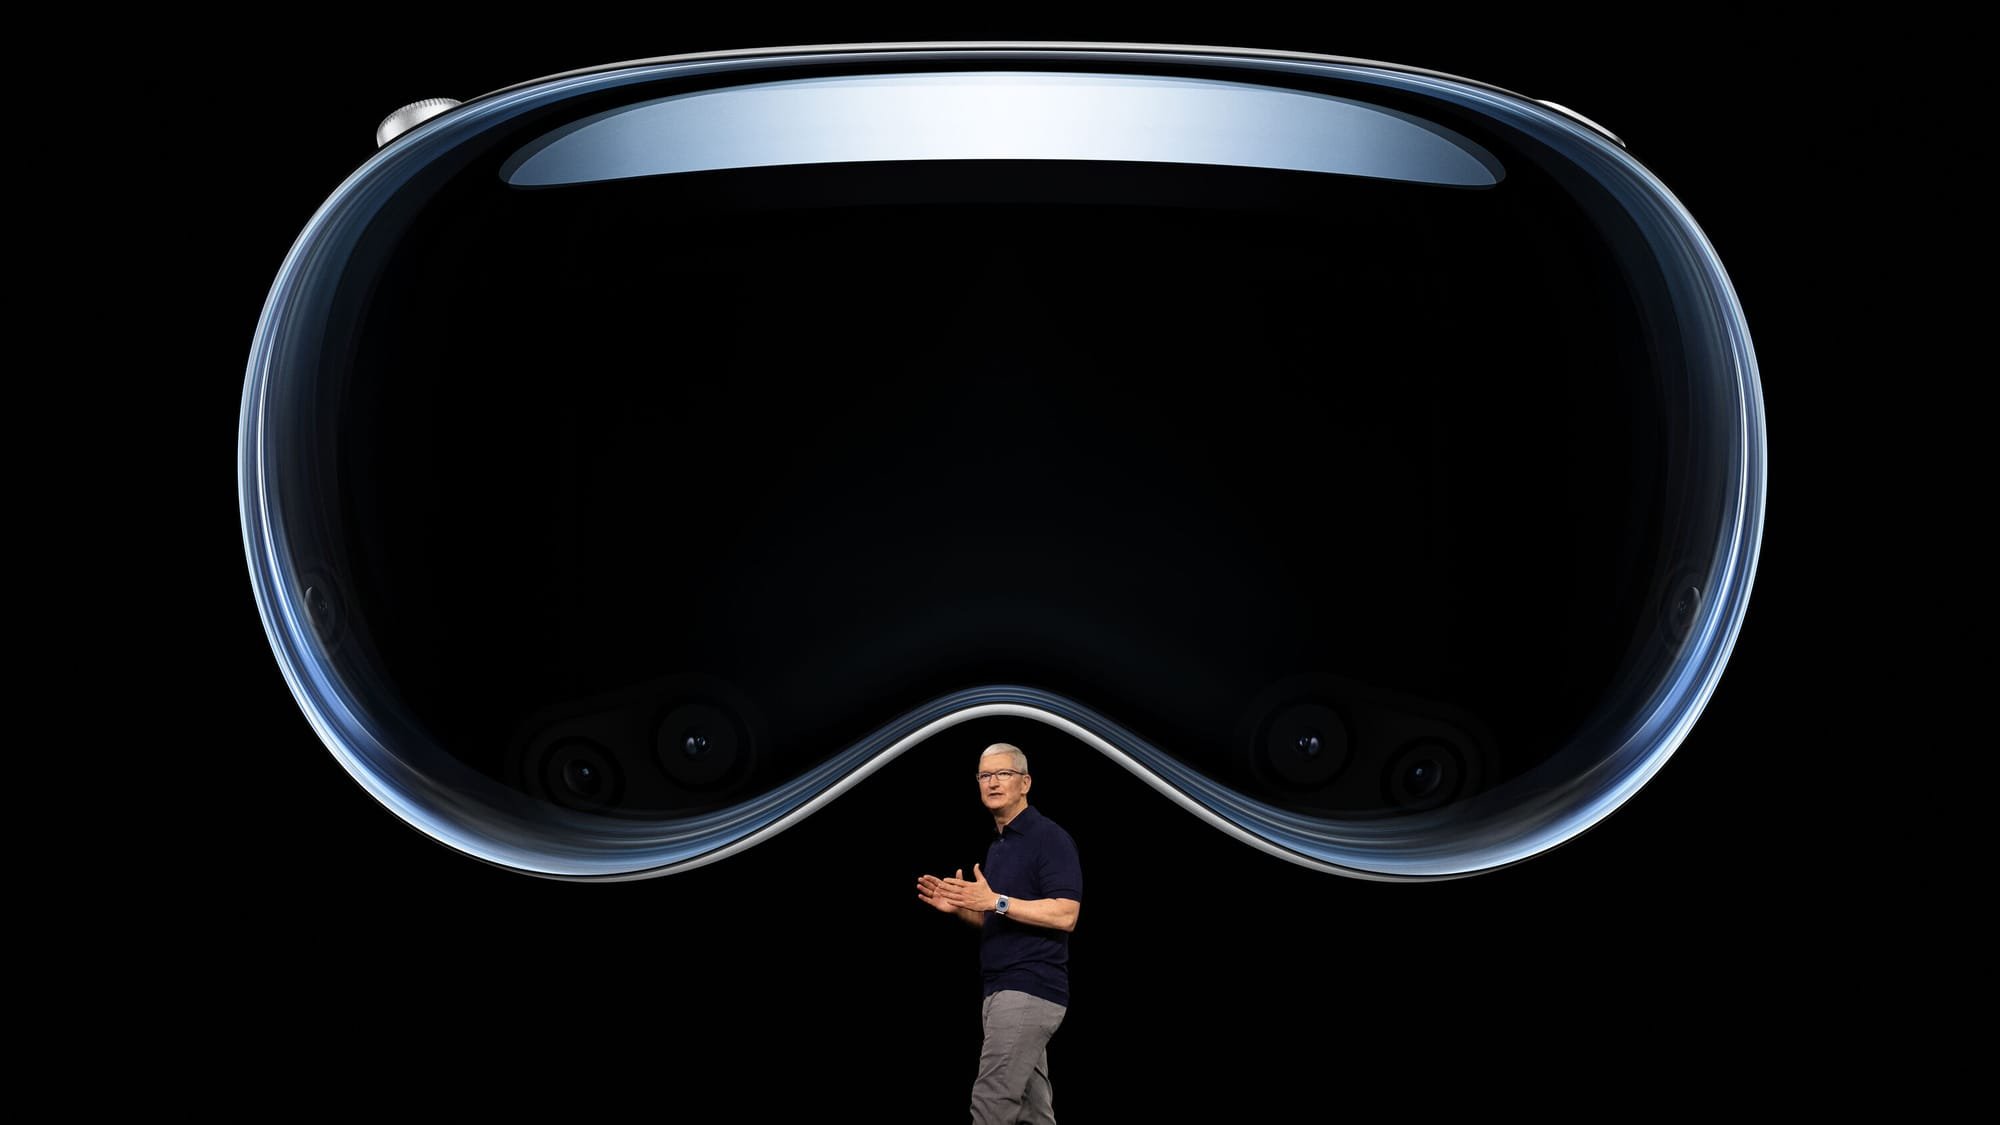 Apple's Metaverse Headset Could Set New Standards